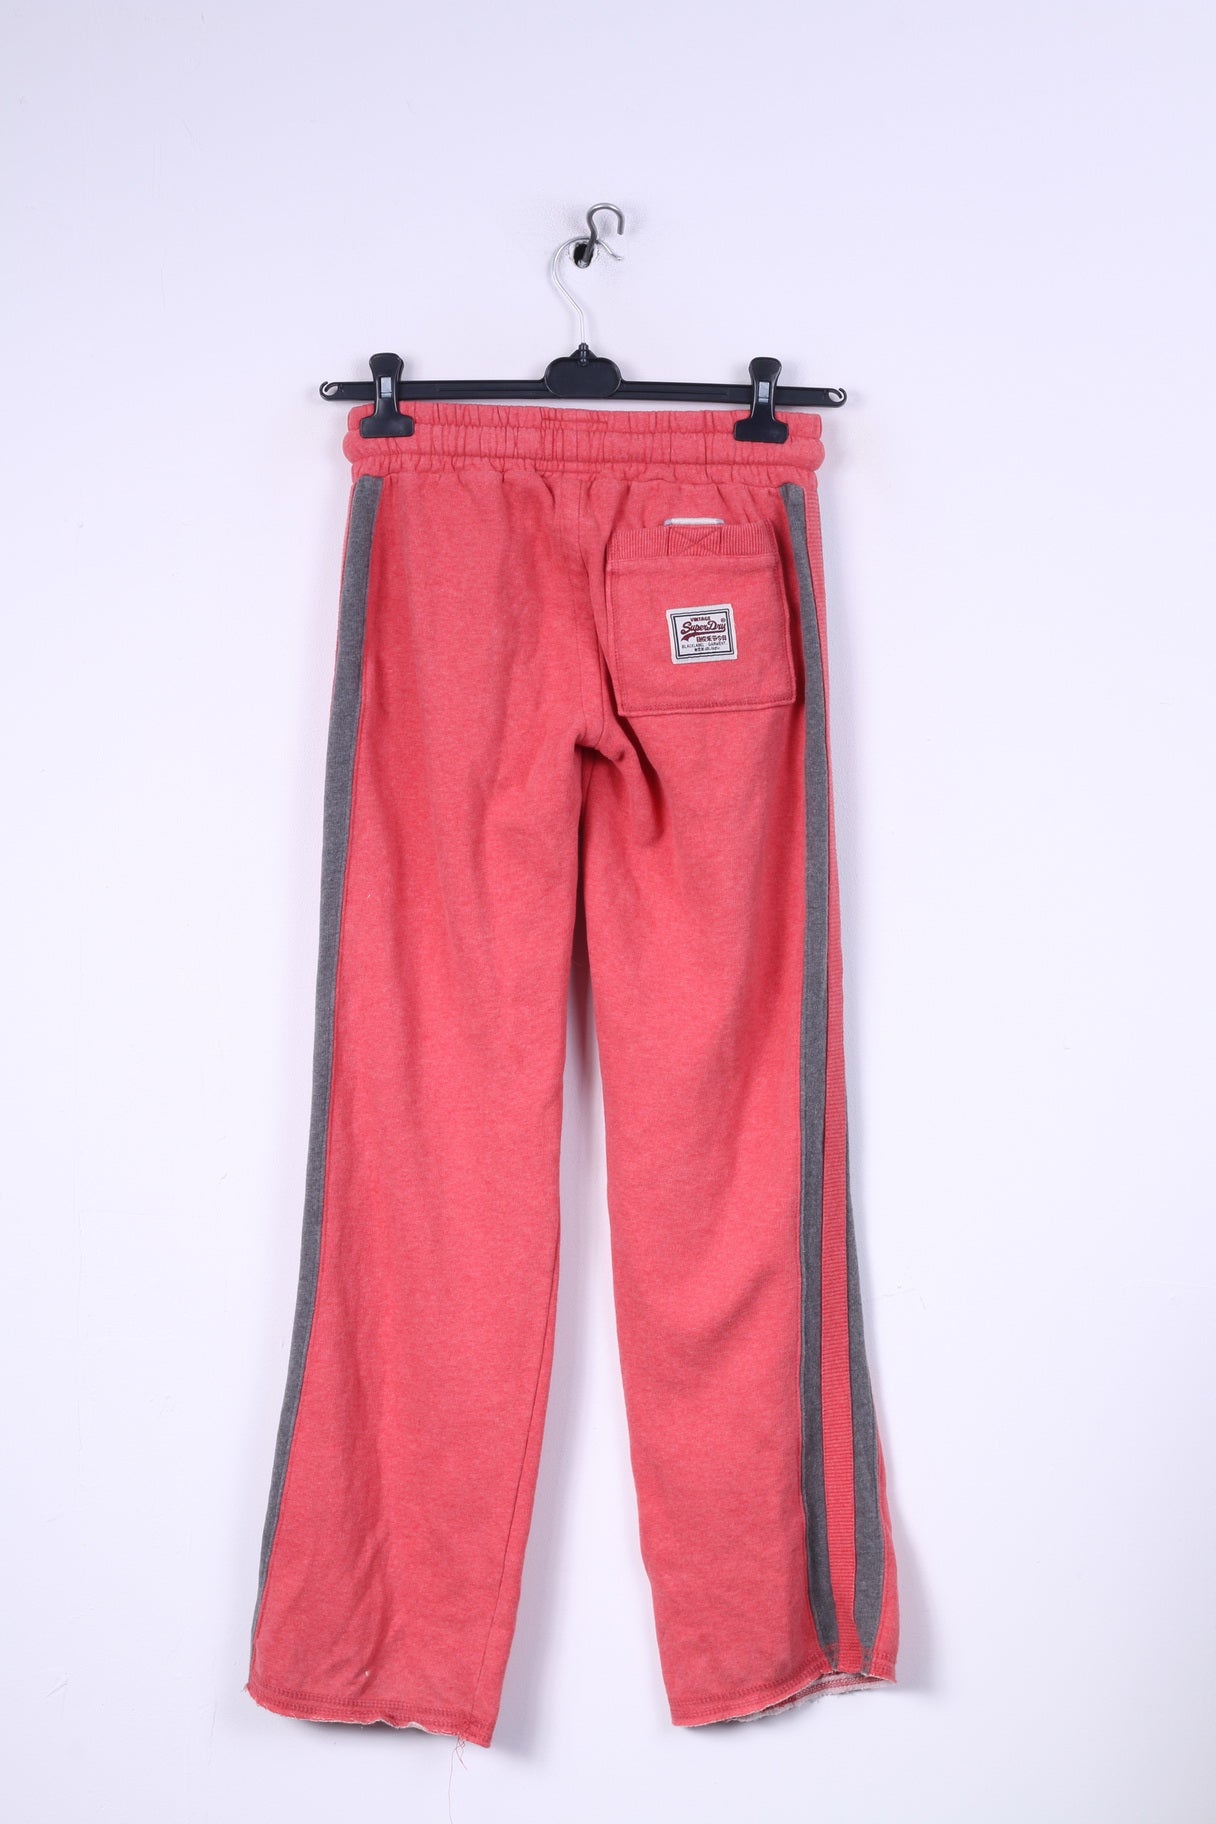 Superdry Mens Xs Sweatpants Hochey Jogger Red Cotton Japan Athletic Sport